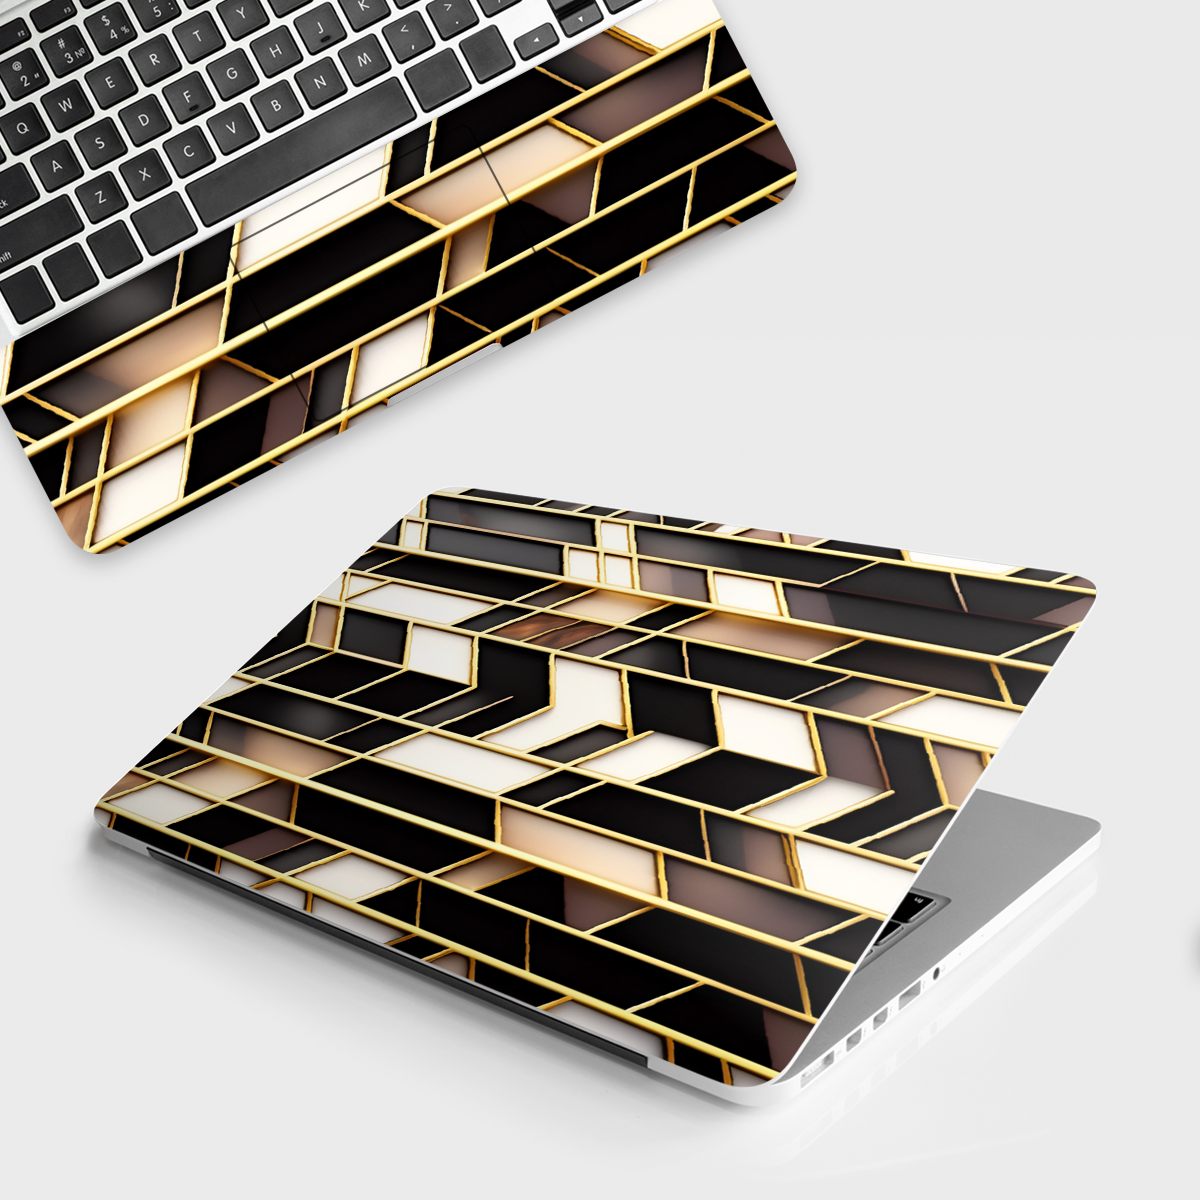 Fomo Store Laptop Skins Abstract Golden Outlines